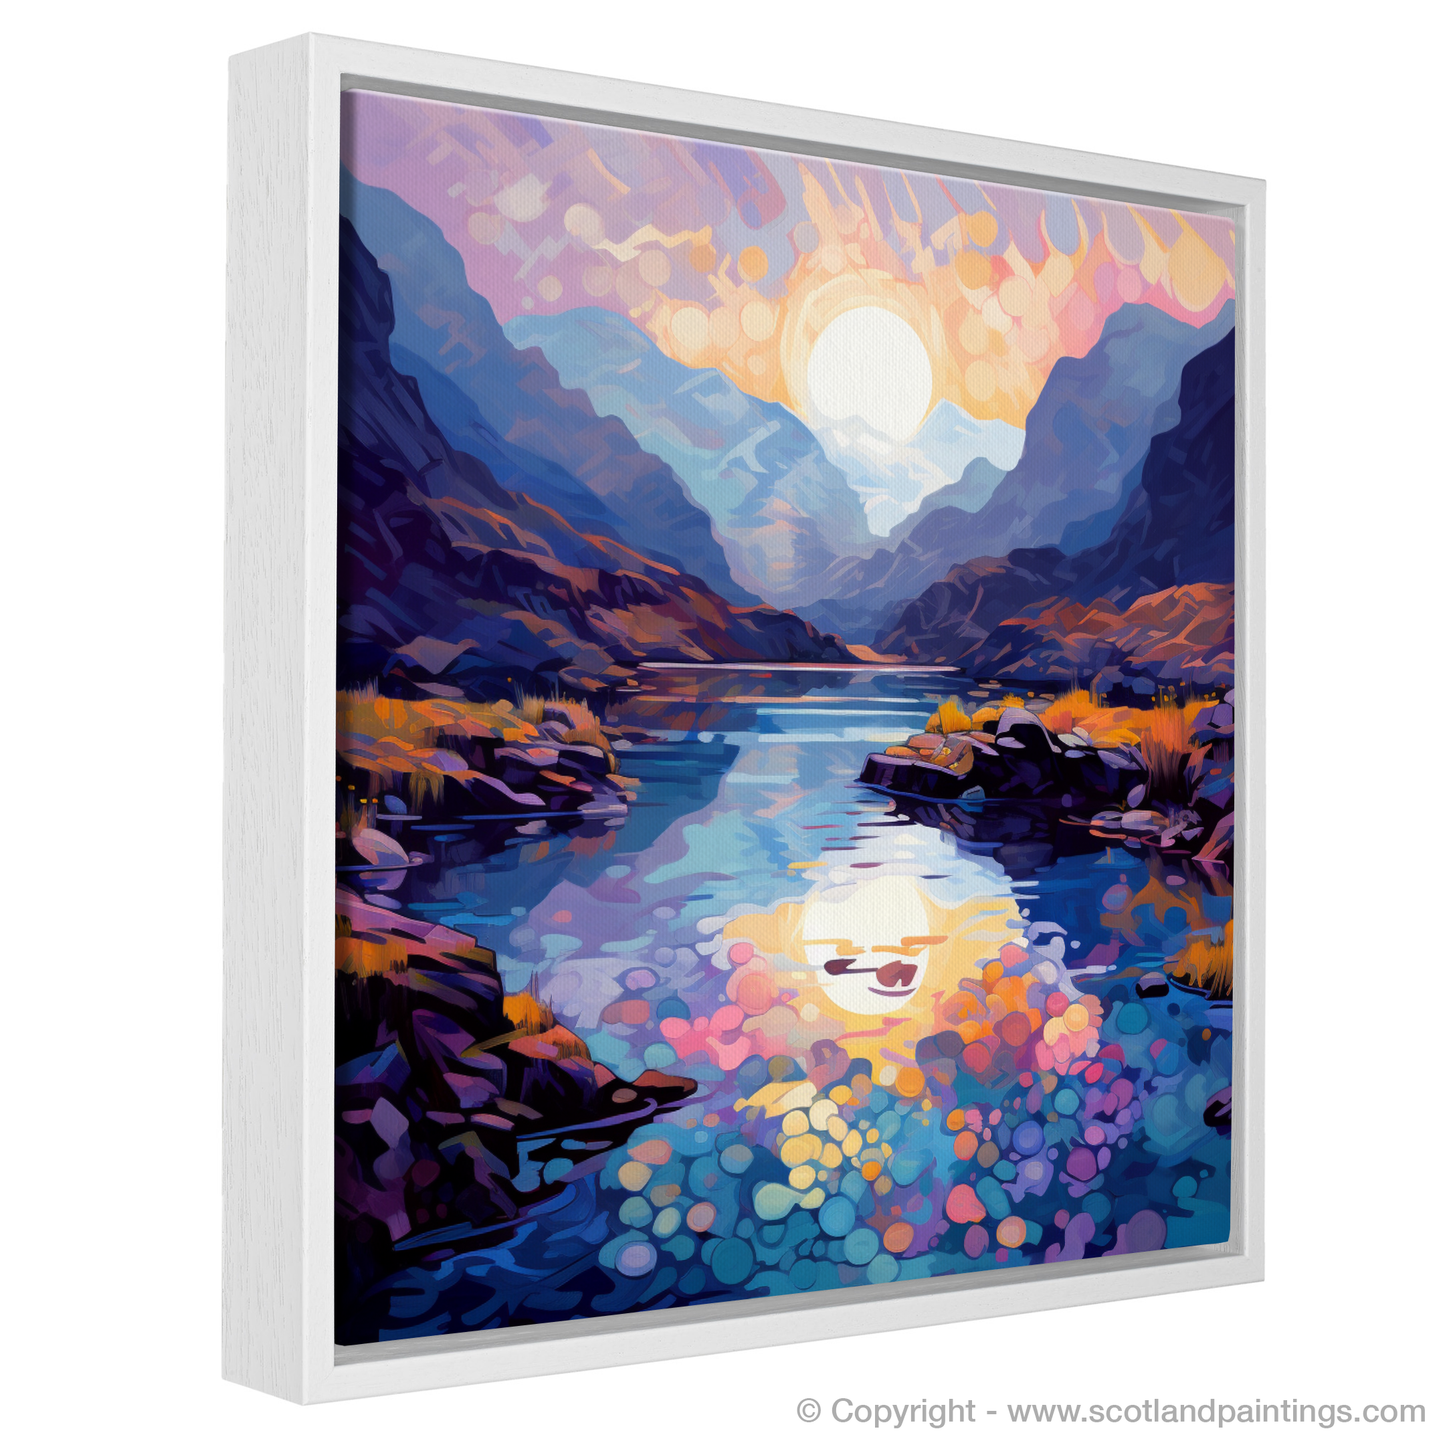 Painting and Art Print of Isle of Skye Fairy Pools at dusk in summer entitled "Dusk at the Fairy Pools: An Impressionist Ode to Highland Summer".